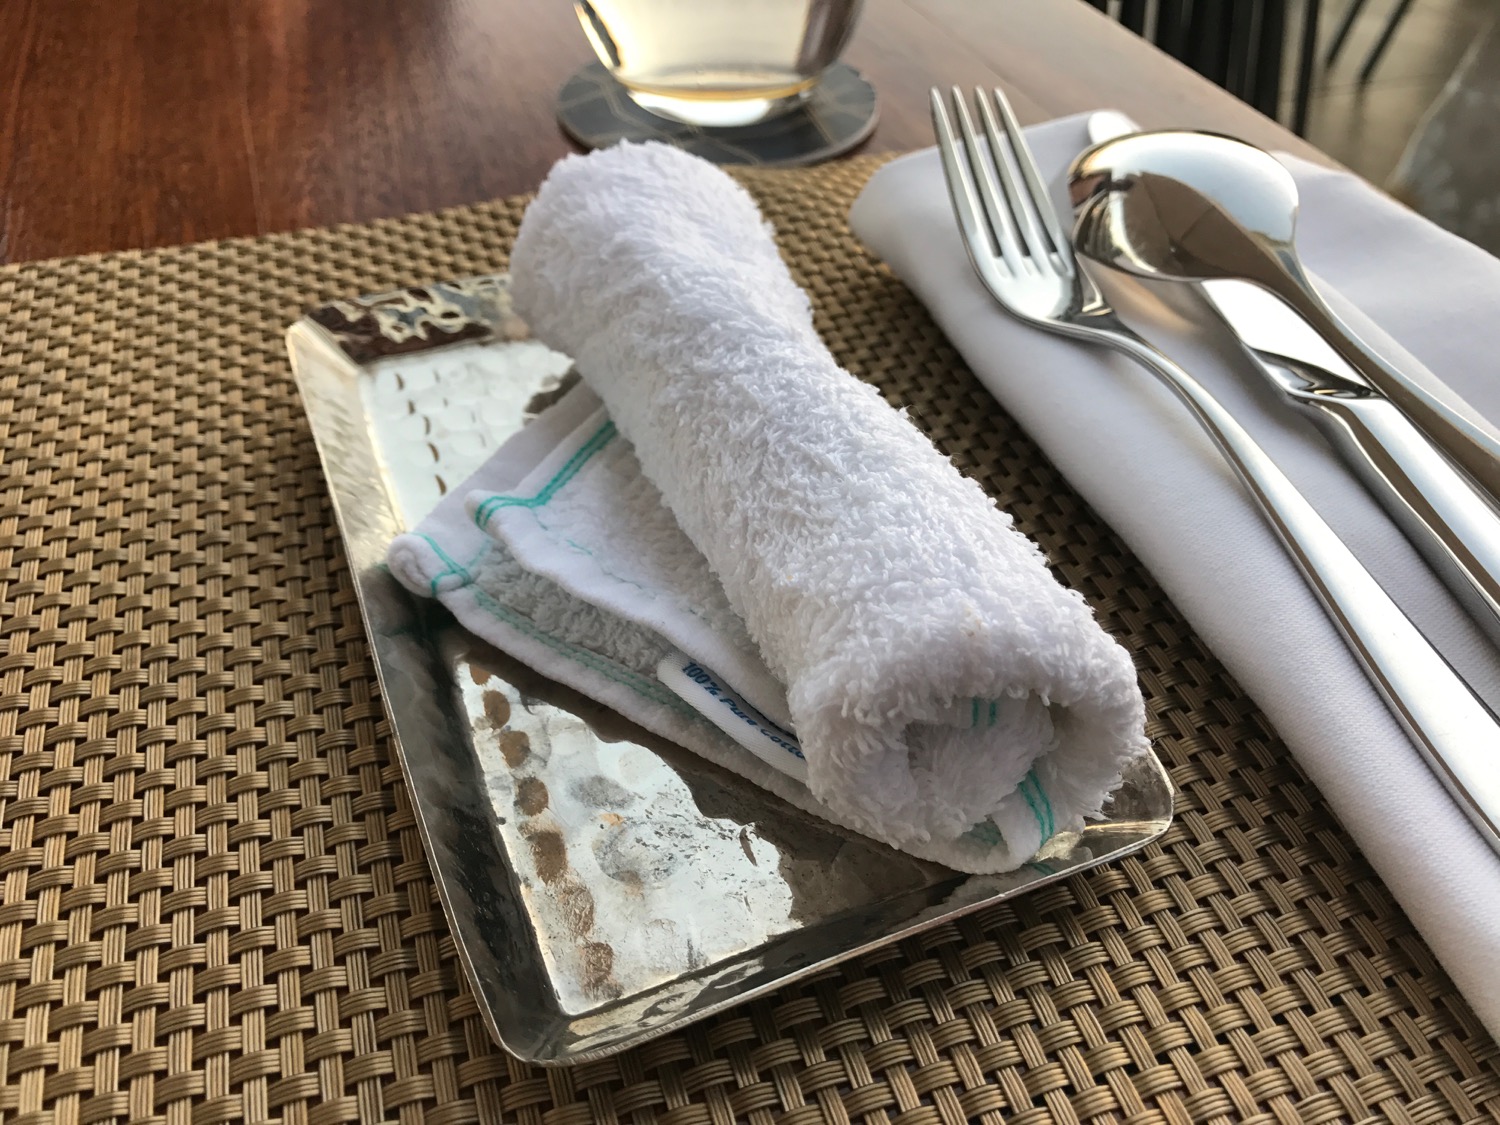 a napkin and fork on a plate